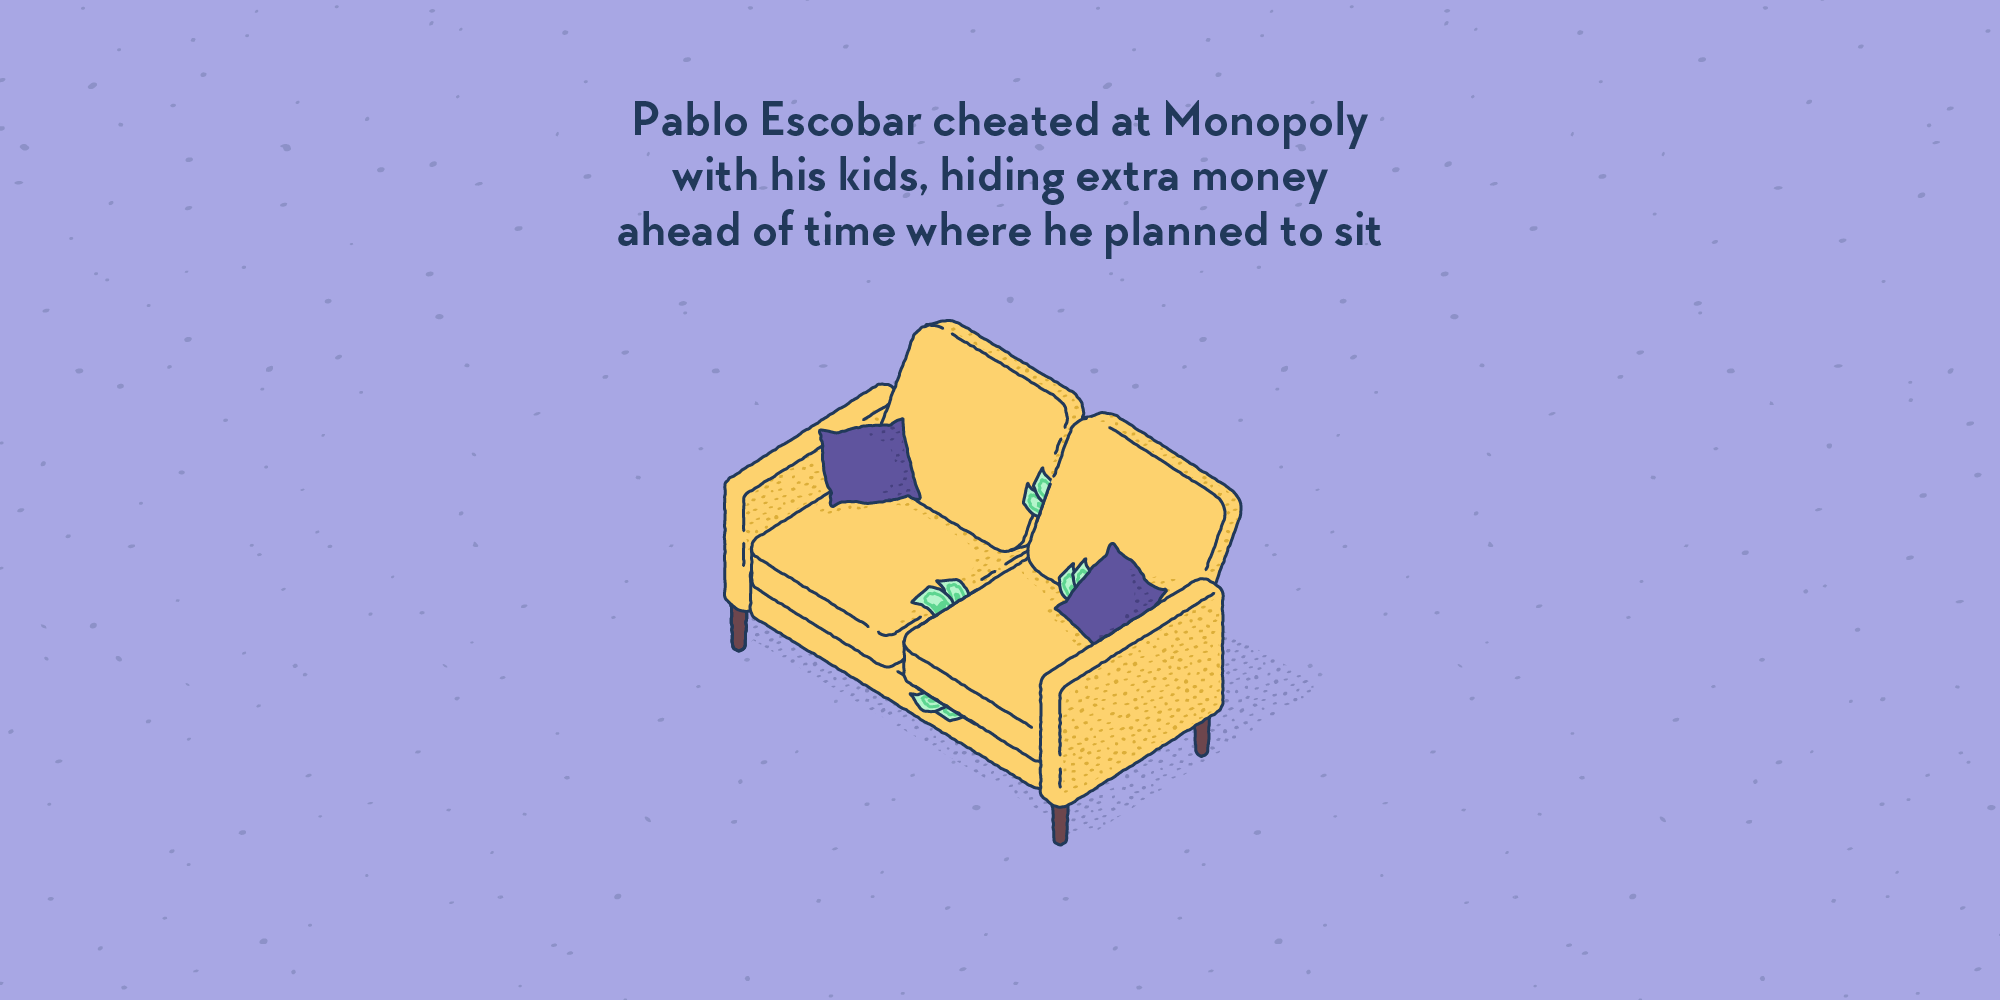 A sofa under the cushions of which are hidden many Monopoly bank notes, poking out from everywhere.